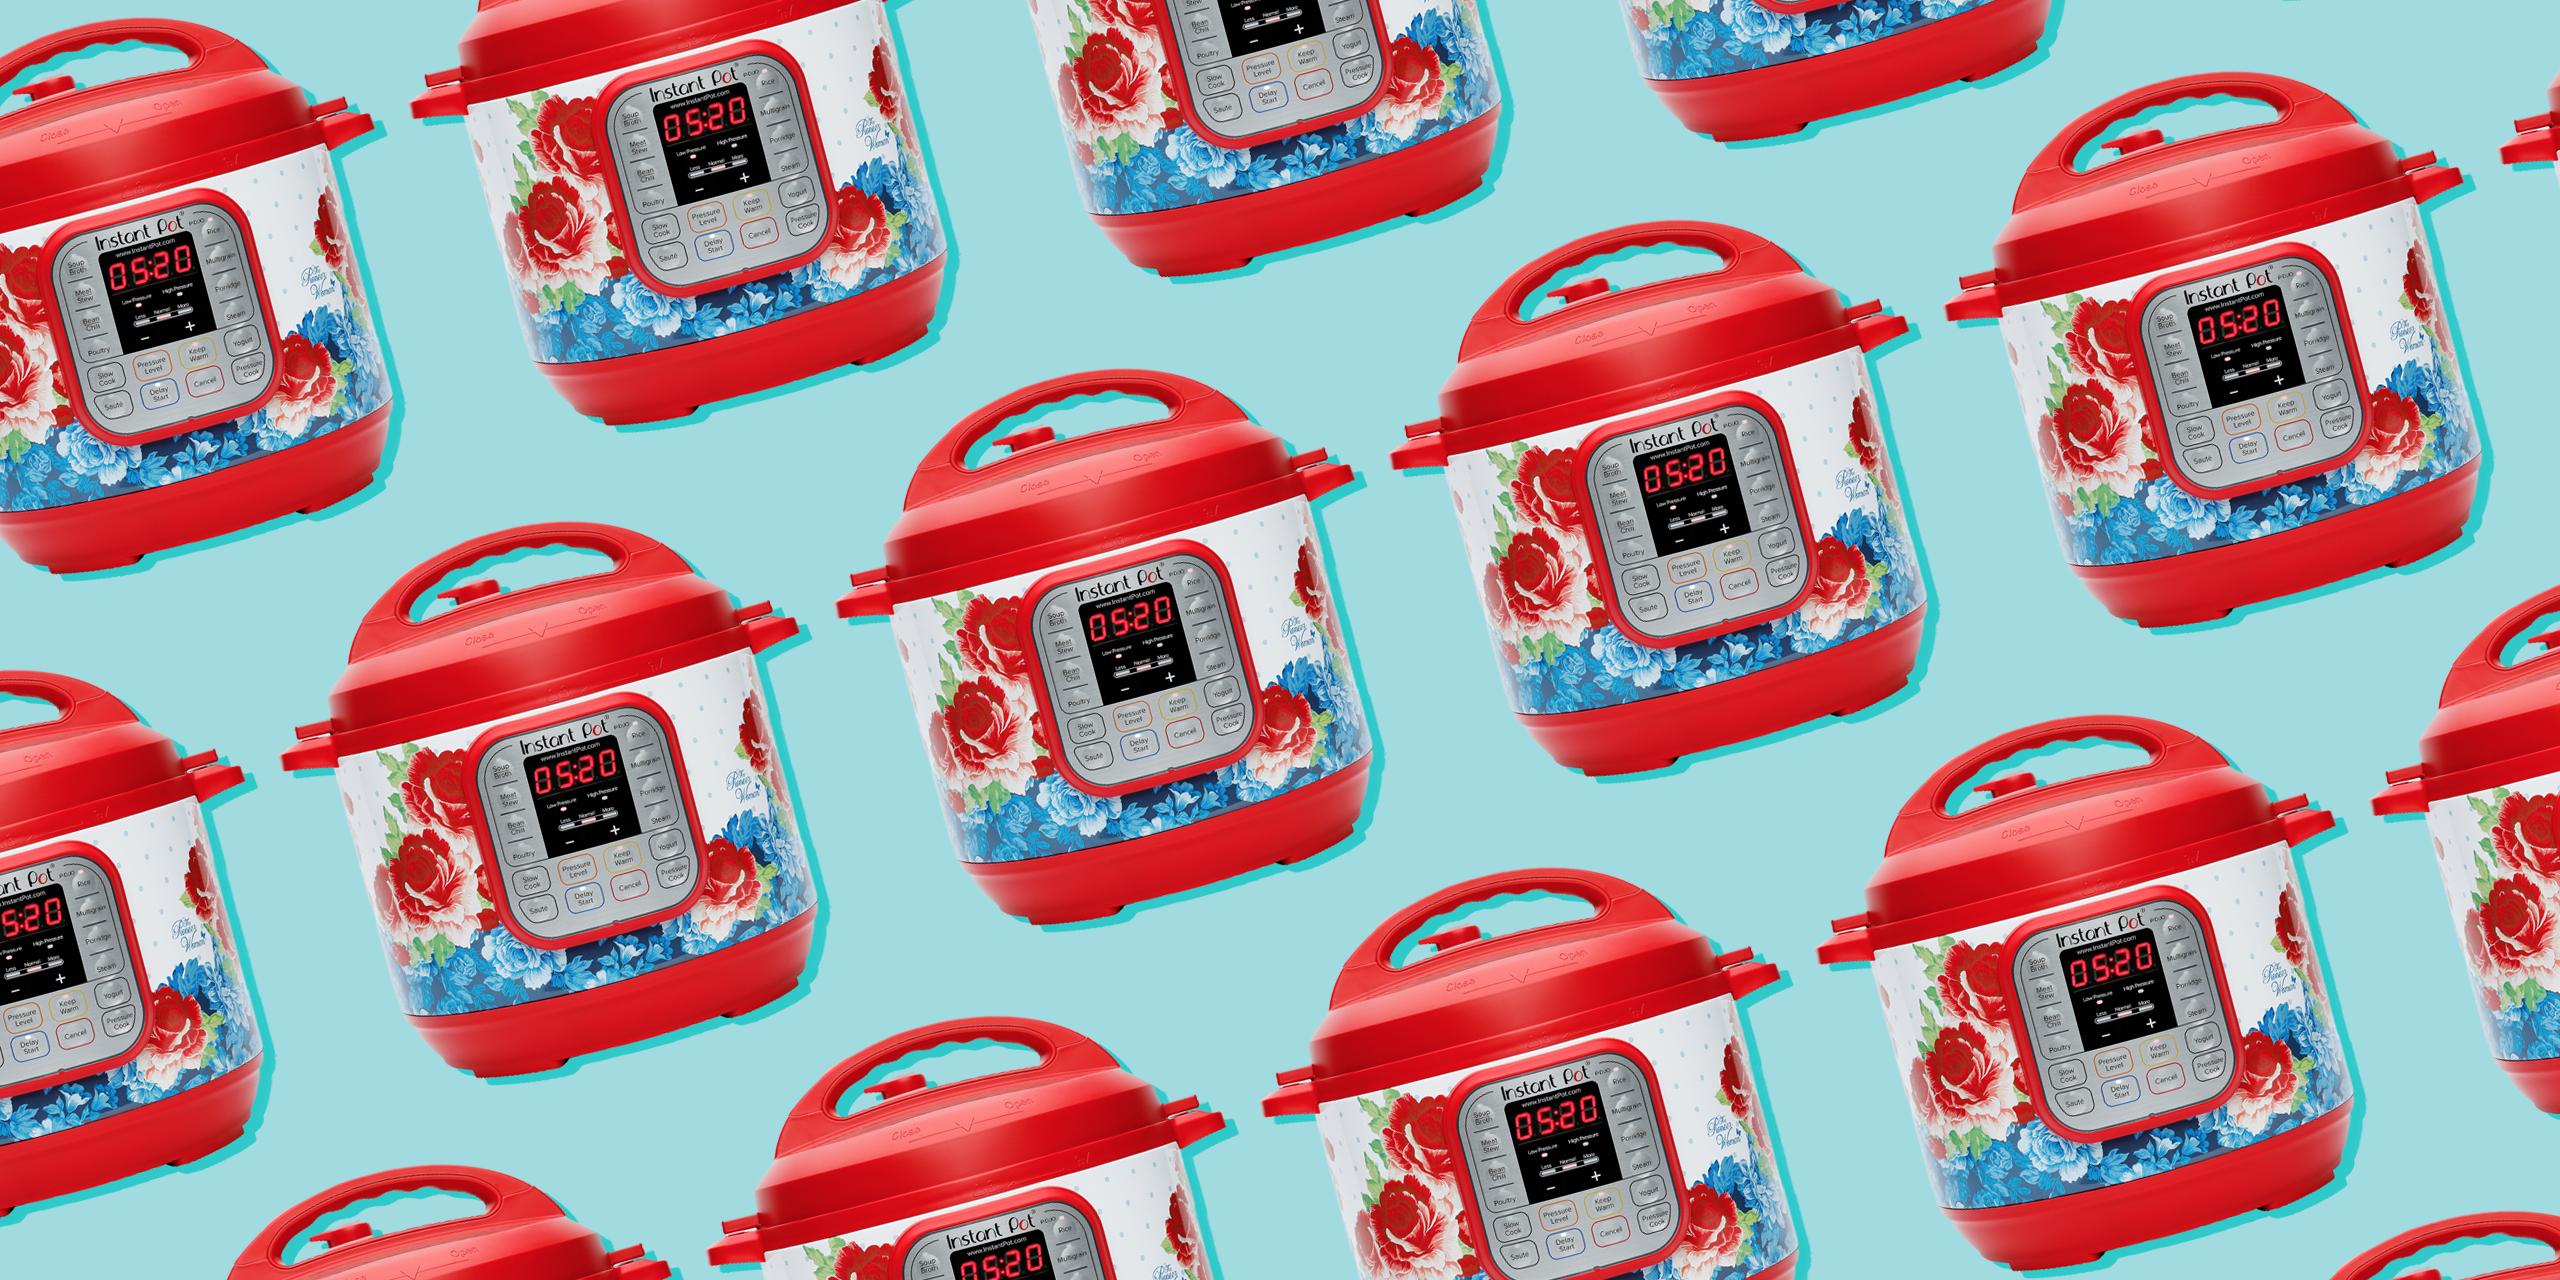 The Pioneer Woman Has a New Frontier Rose Instant Pot Available for  Pre-Order